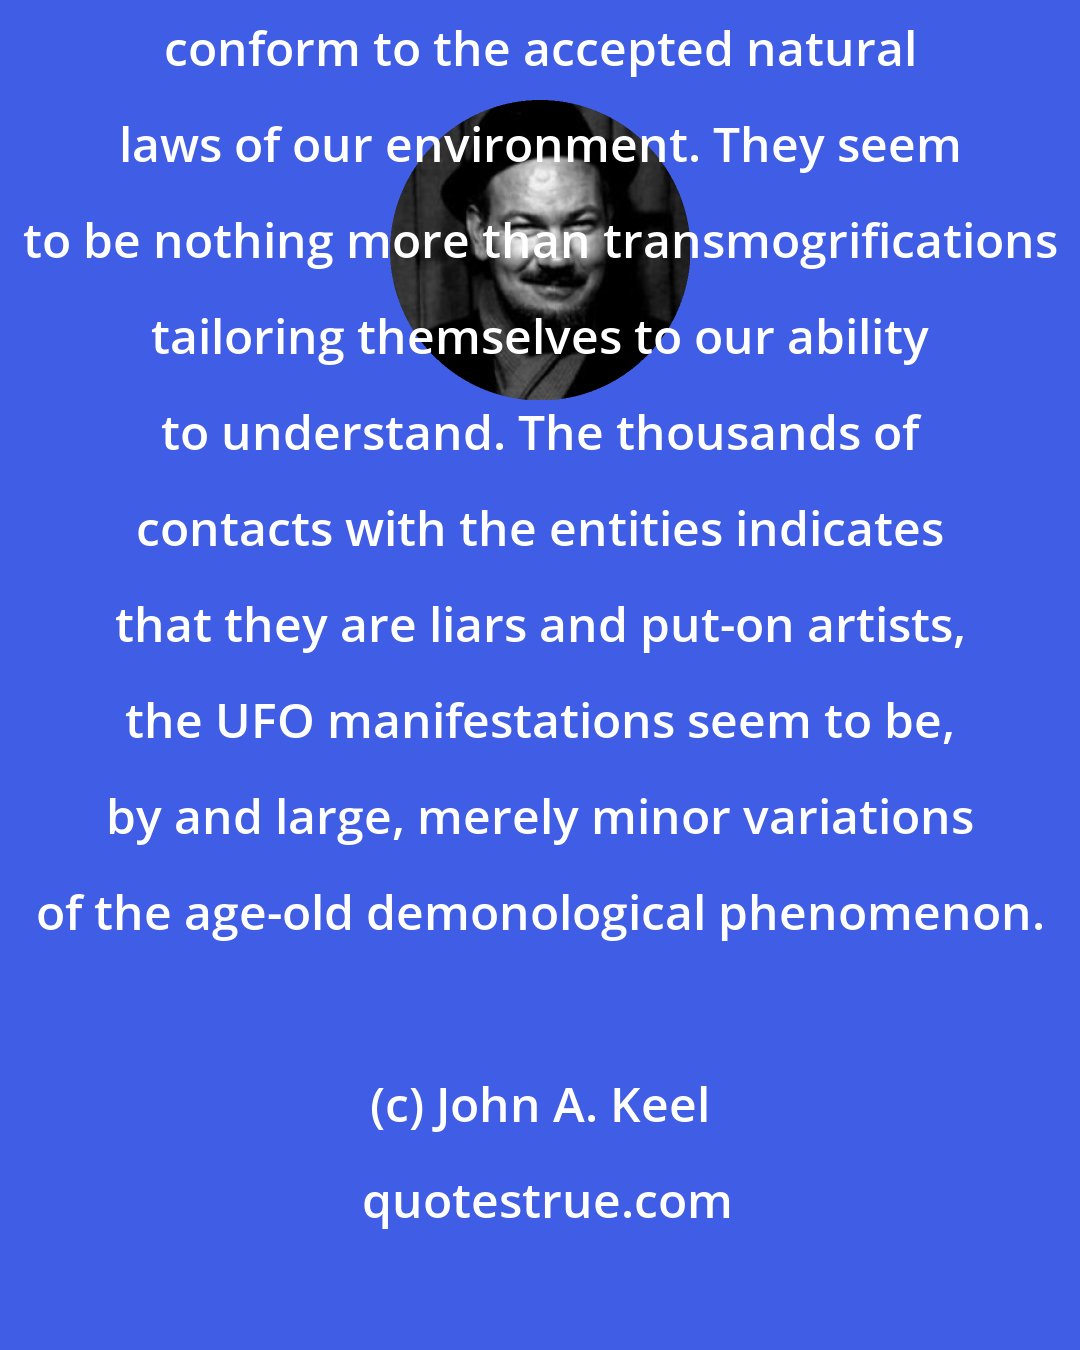 John A. Keel: The UFOs do not seem to exist as tangible, manufactured objects. They do not conform to the accepted natural laws of our environment. They seem to be nothing more than transmogrifications tailoring themselves to our ability to understand. The thousands of contacts with the entities indicates that they are liars and put-on artists, the UFO manifestations seem to be, by and large, merely minor variations of the age-old demonological phenomenon.